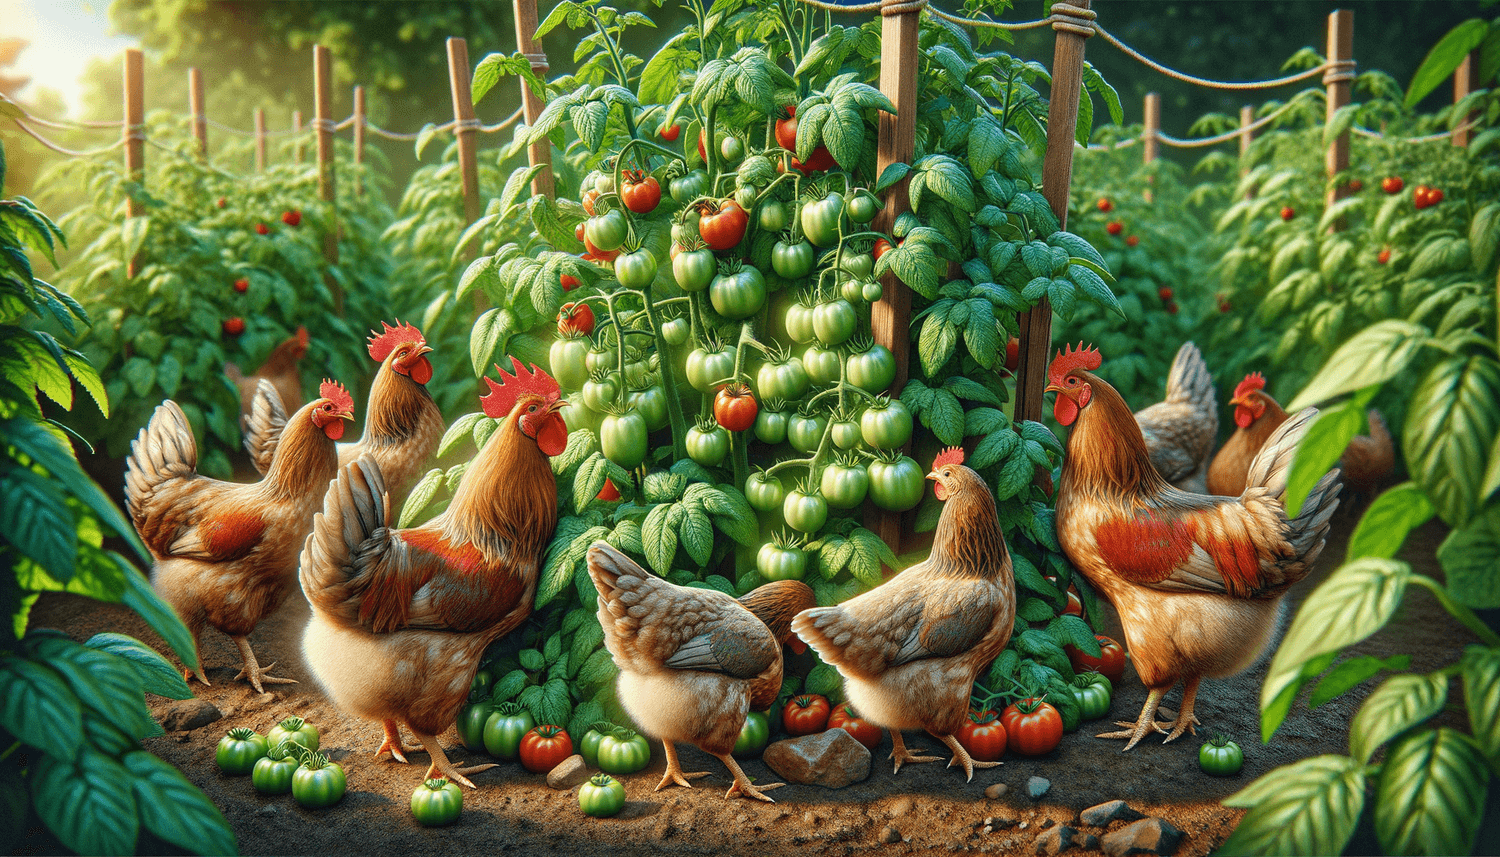 Can Chickens Eat Tomato Plants?